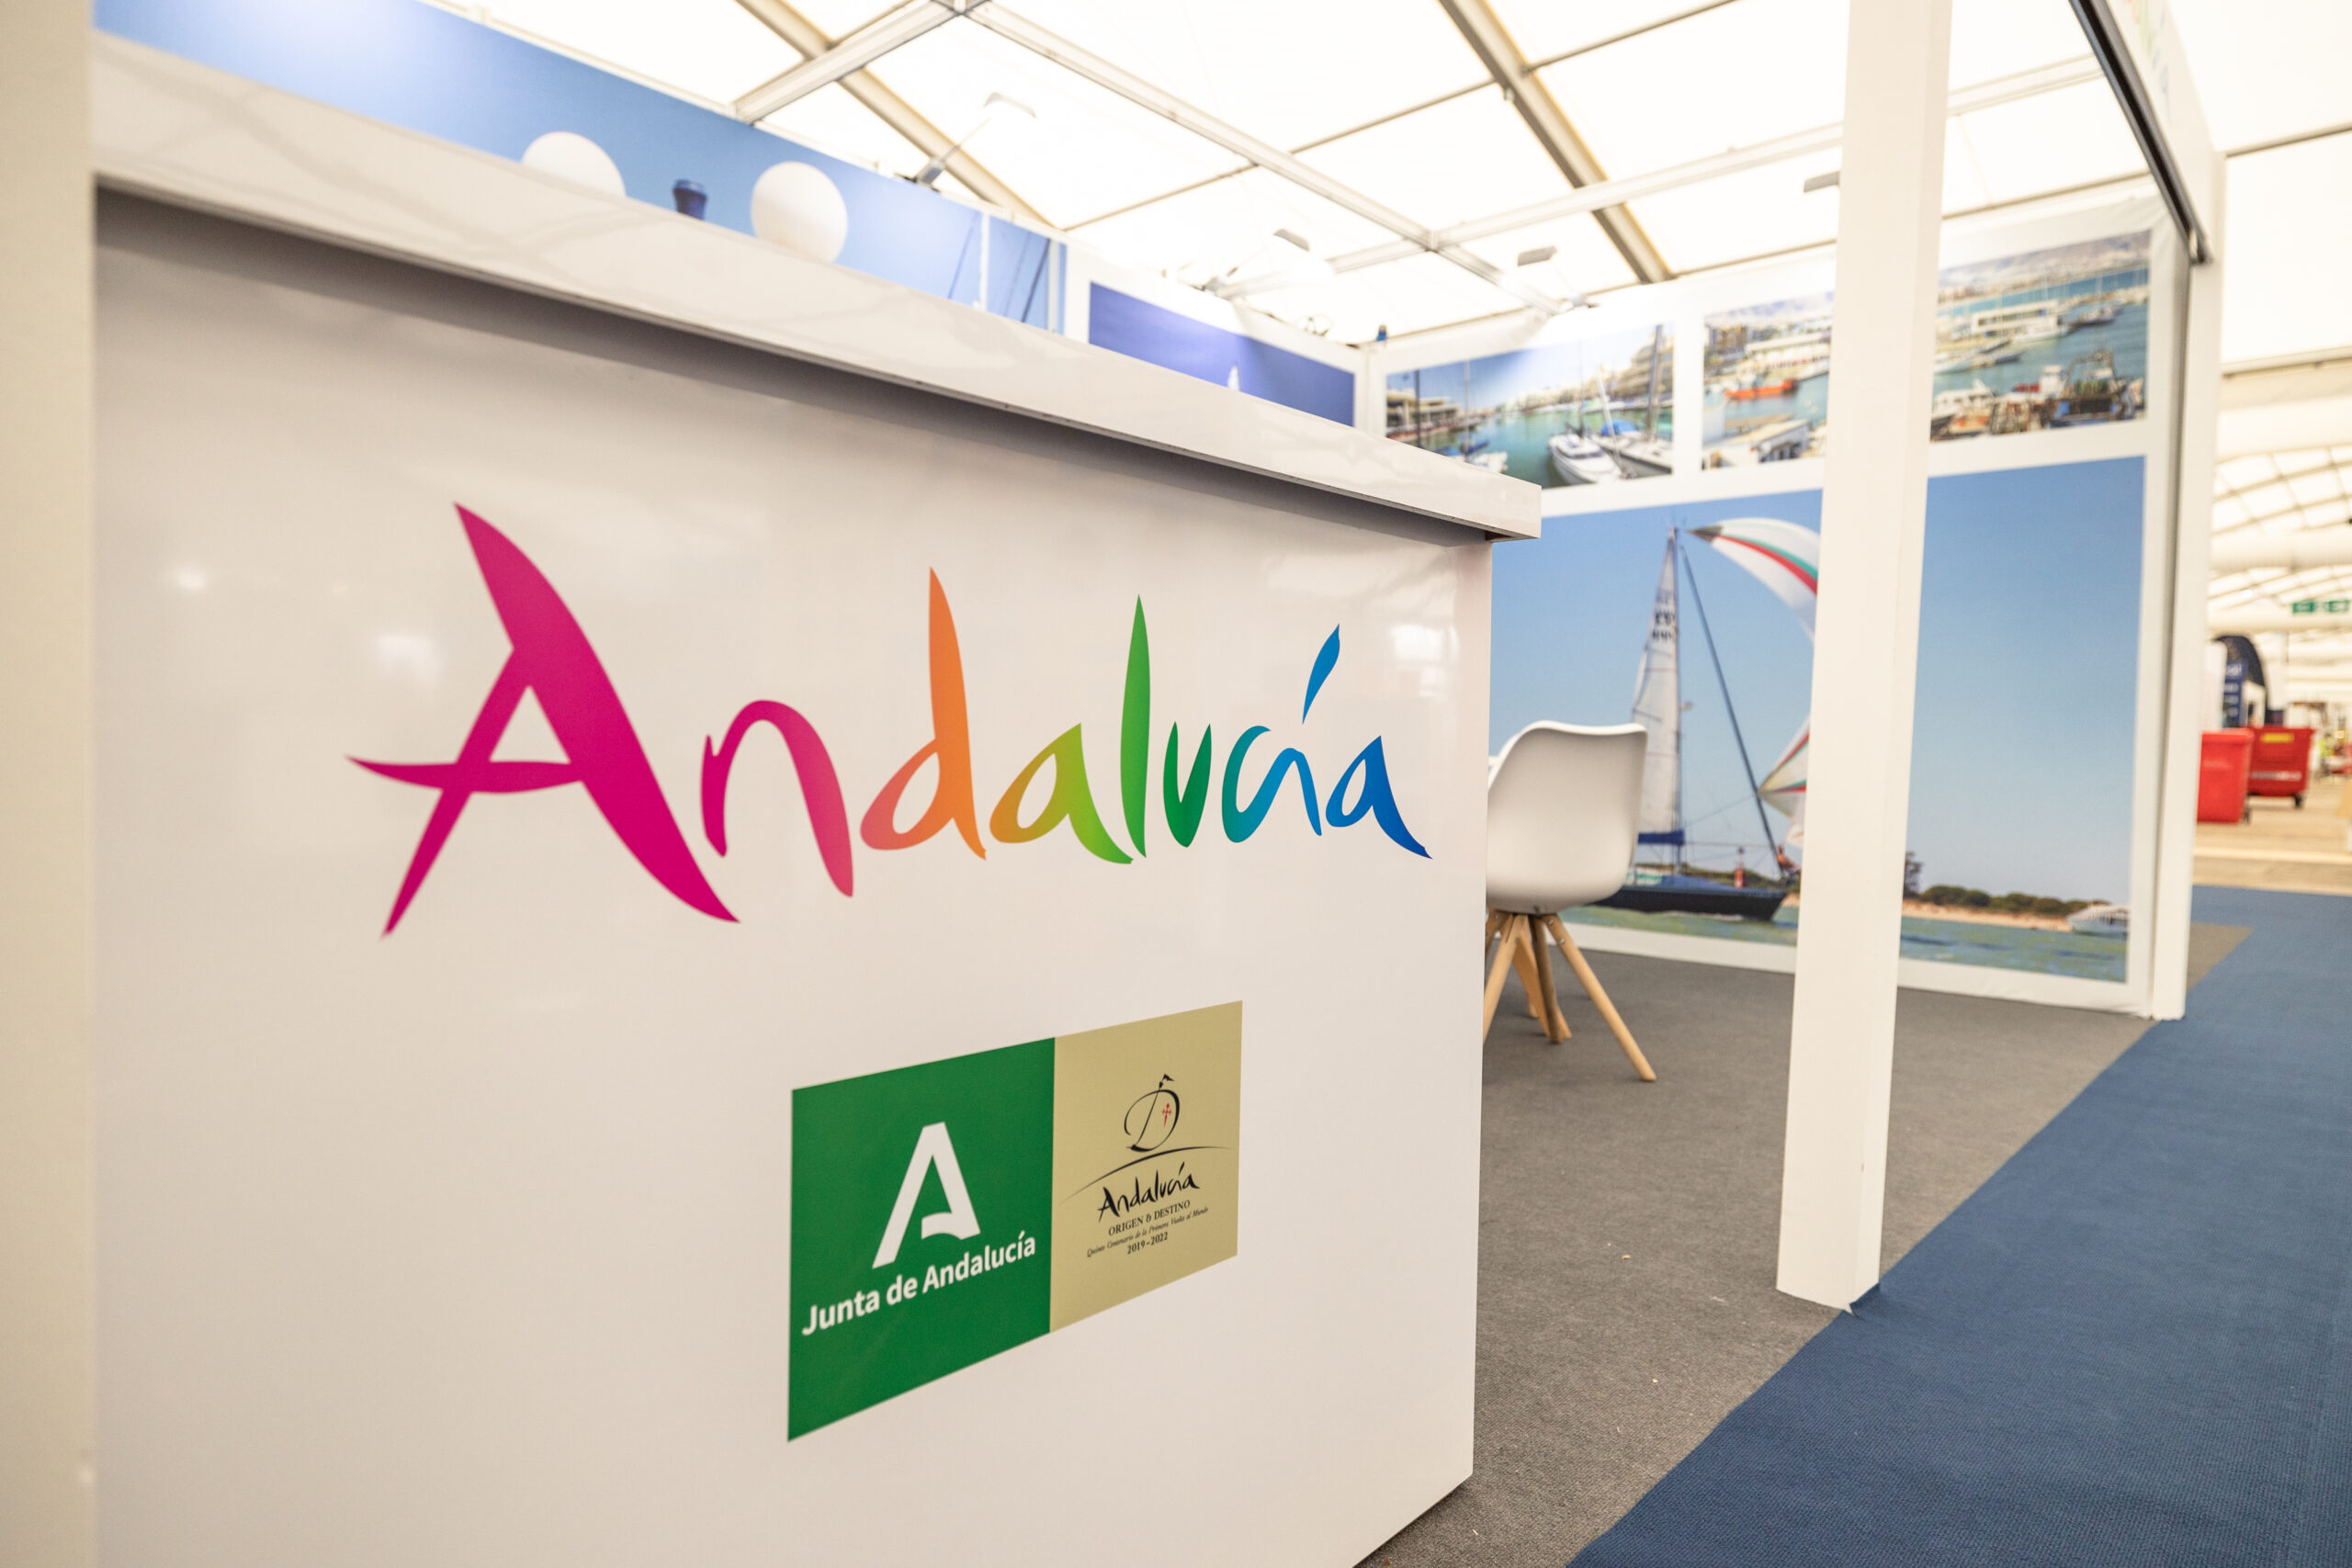 Stand Andalucia Southampton boat Show 2021